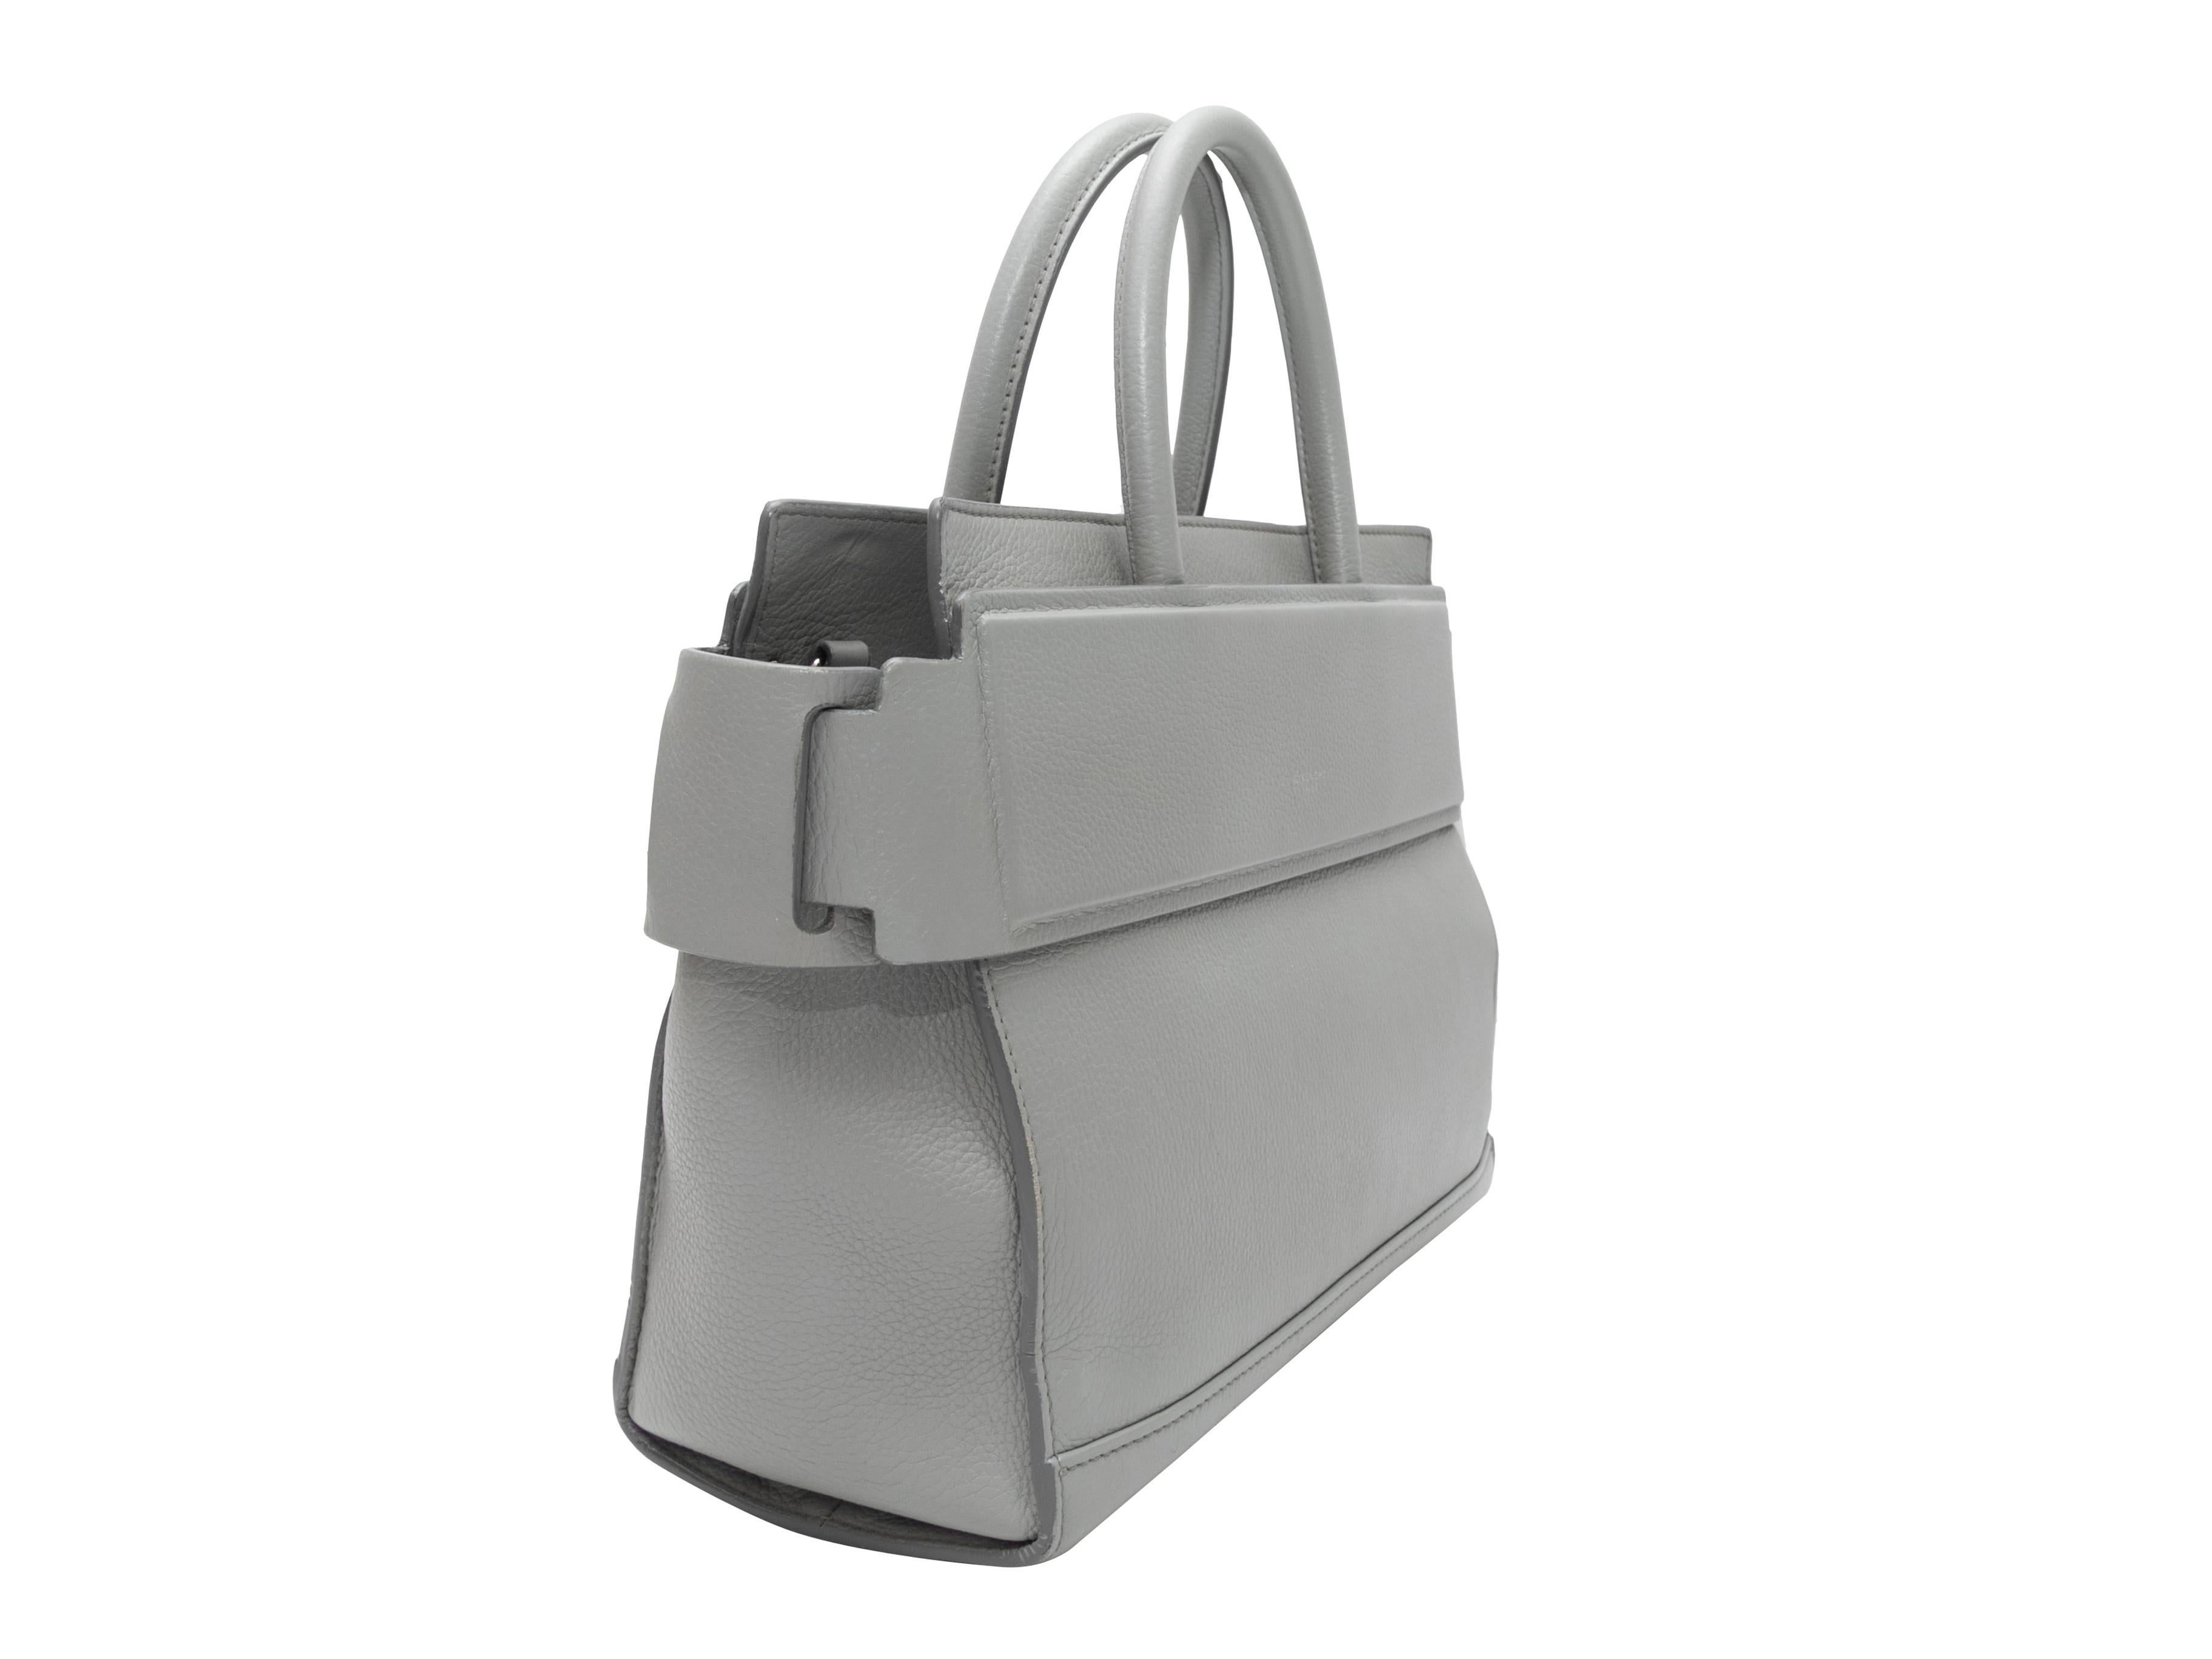 Grey Givenchy Small Horizon Satchel In Excellent Condition For Sale In New York, NY